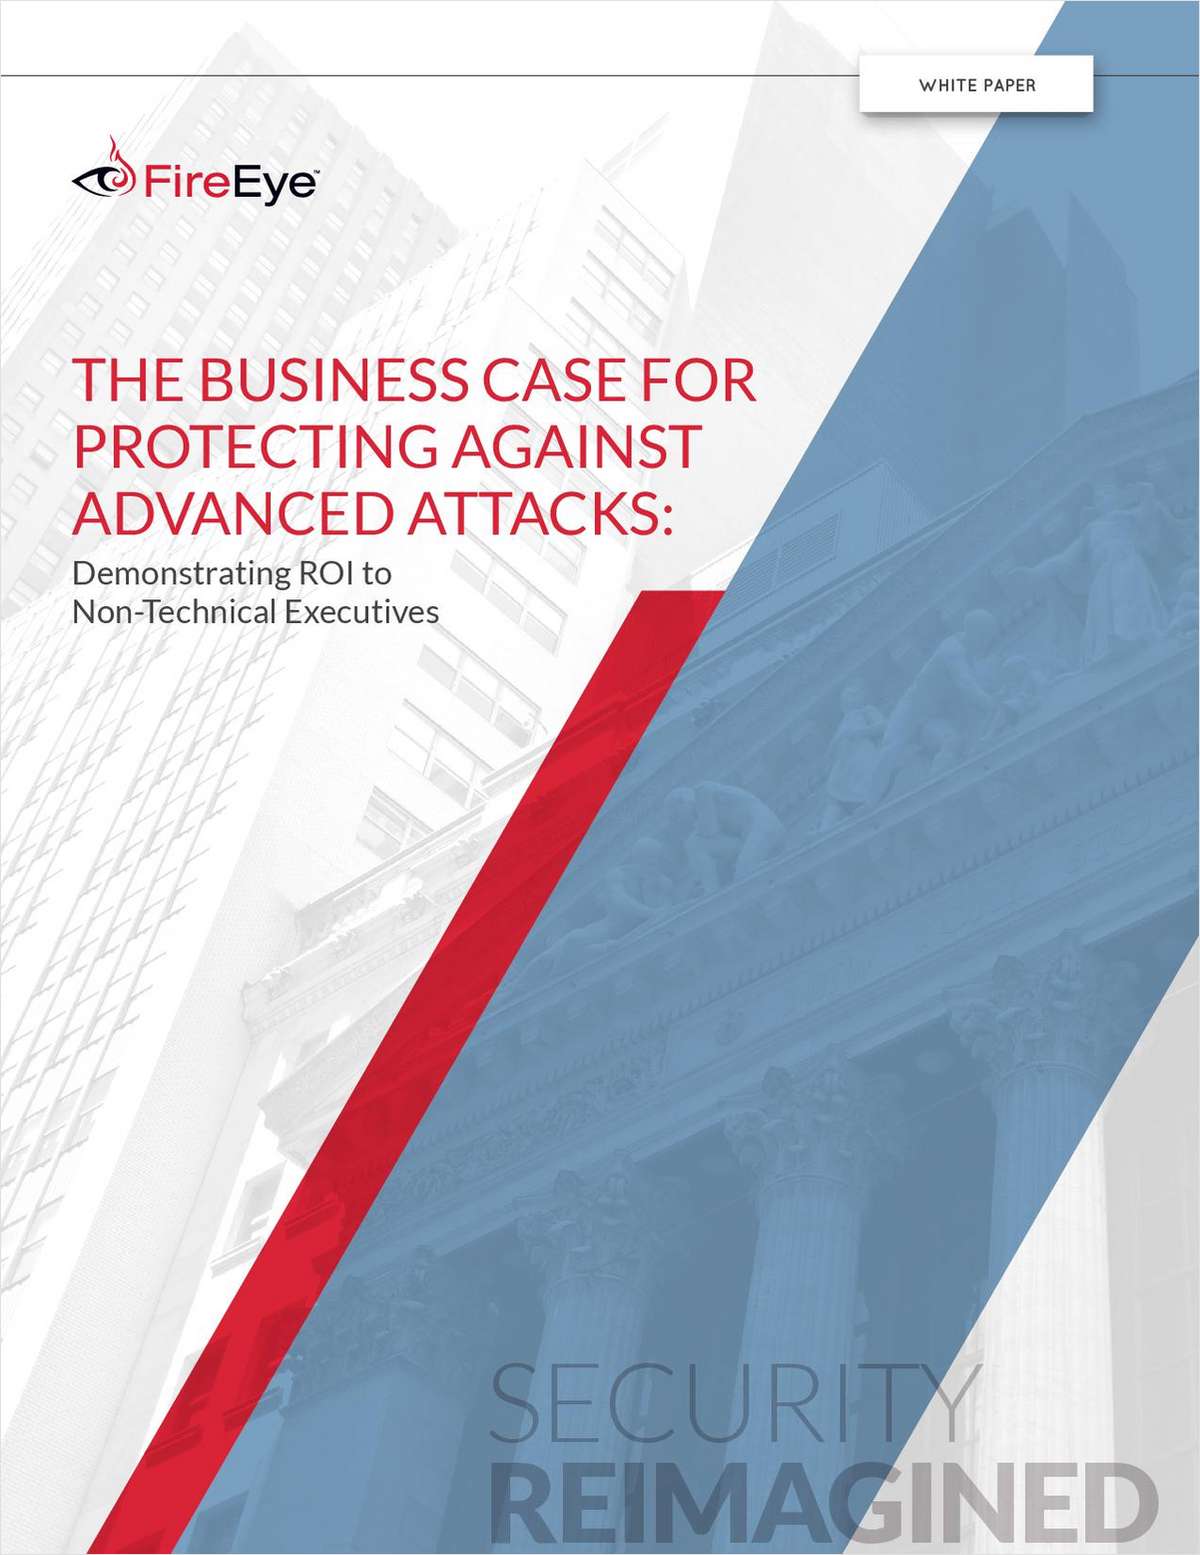 The Business Case for Protecting Against Advanced Attacks: Demonstrating ROI to Non-Technical Executives